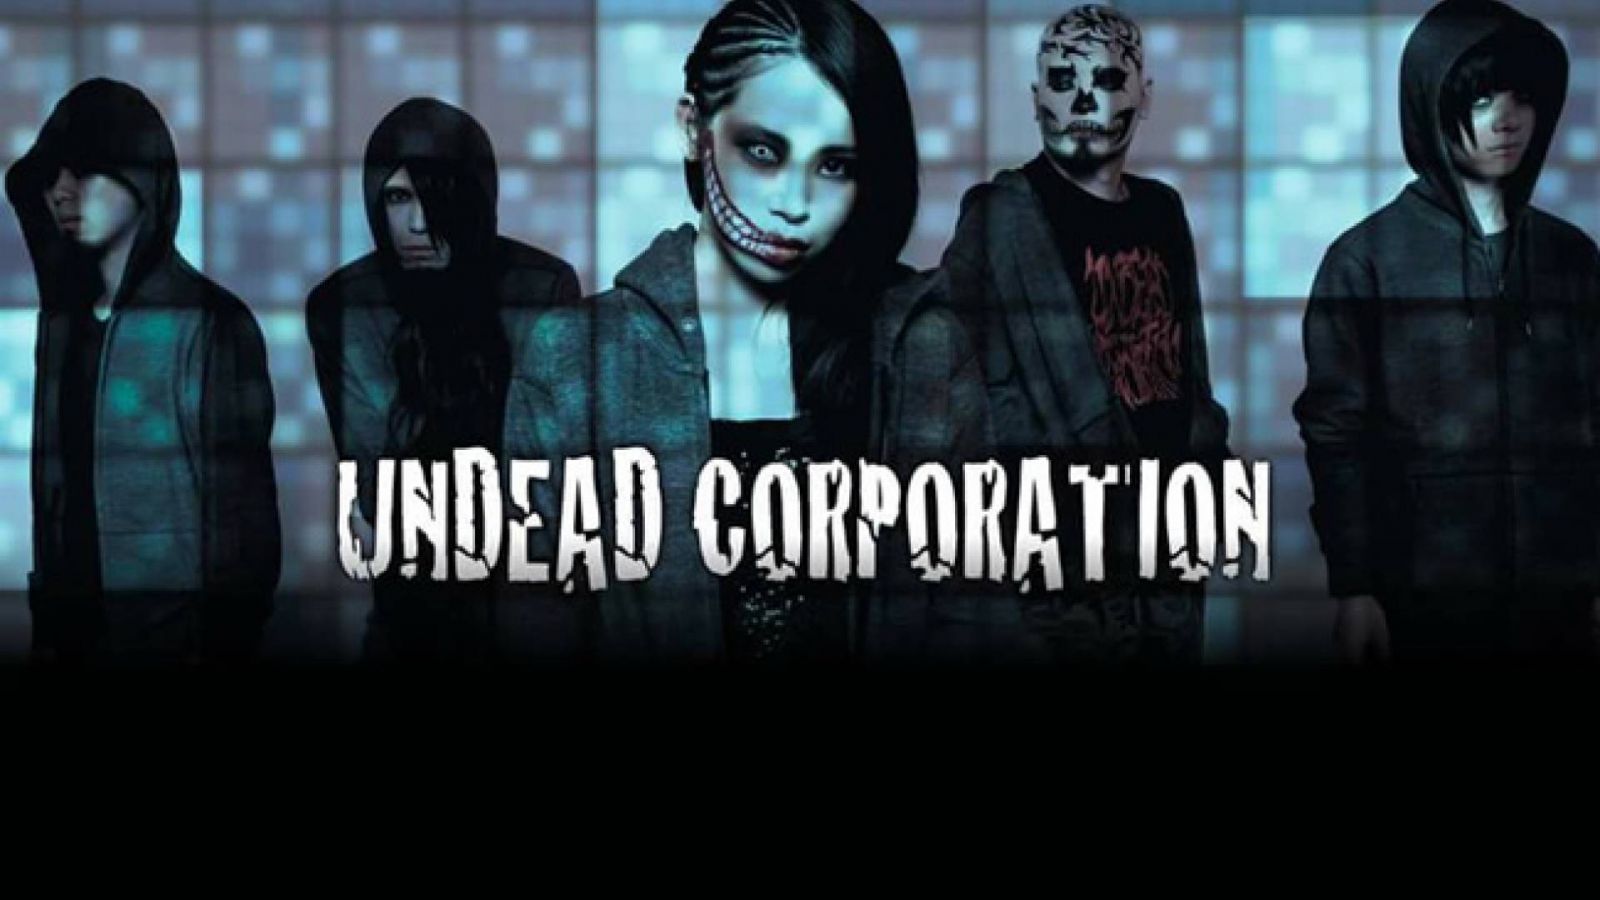 Entrevista con UNDEAD CORPORATION © 2015 UNDEAD CORPORATION. All rights reserved.